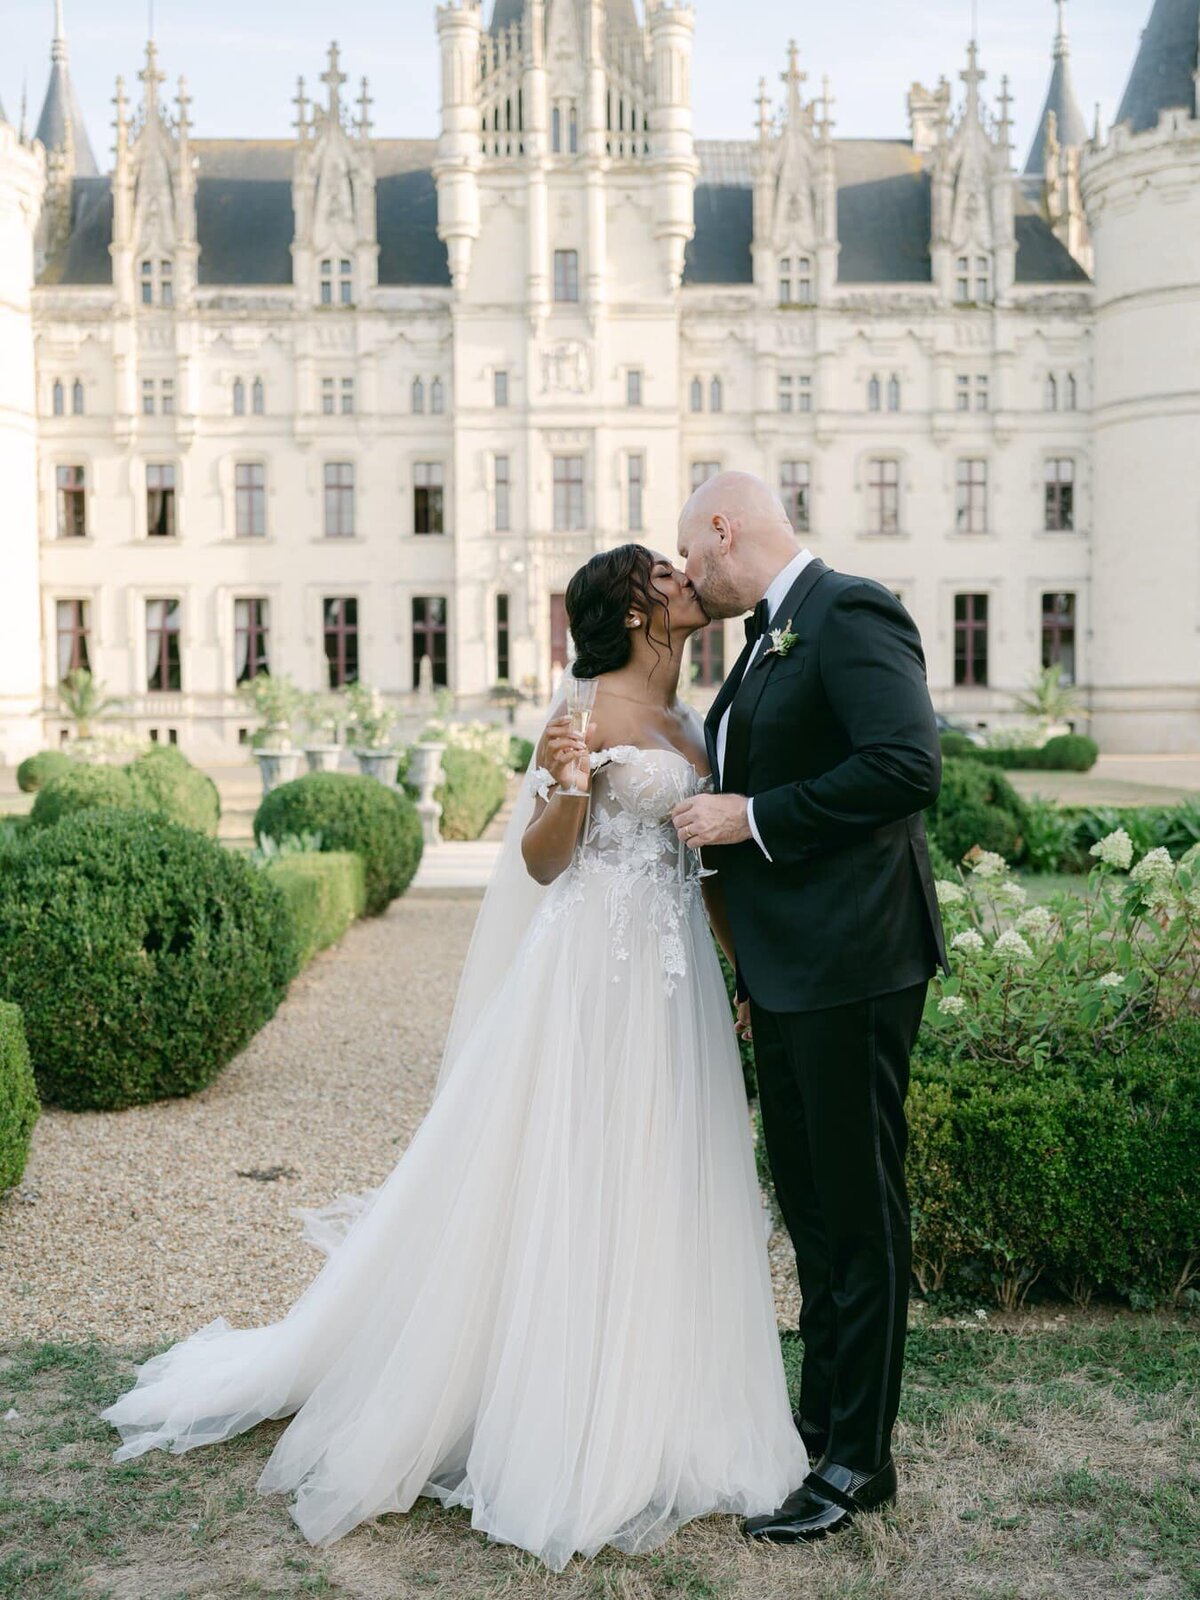 Serenity Photography - Wedding in France chateau 116